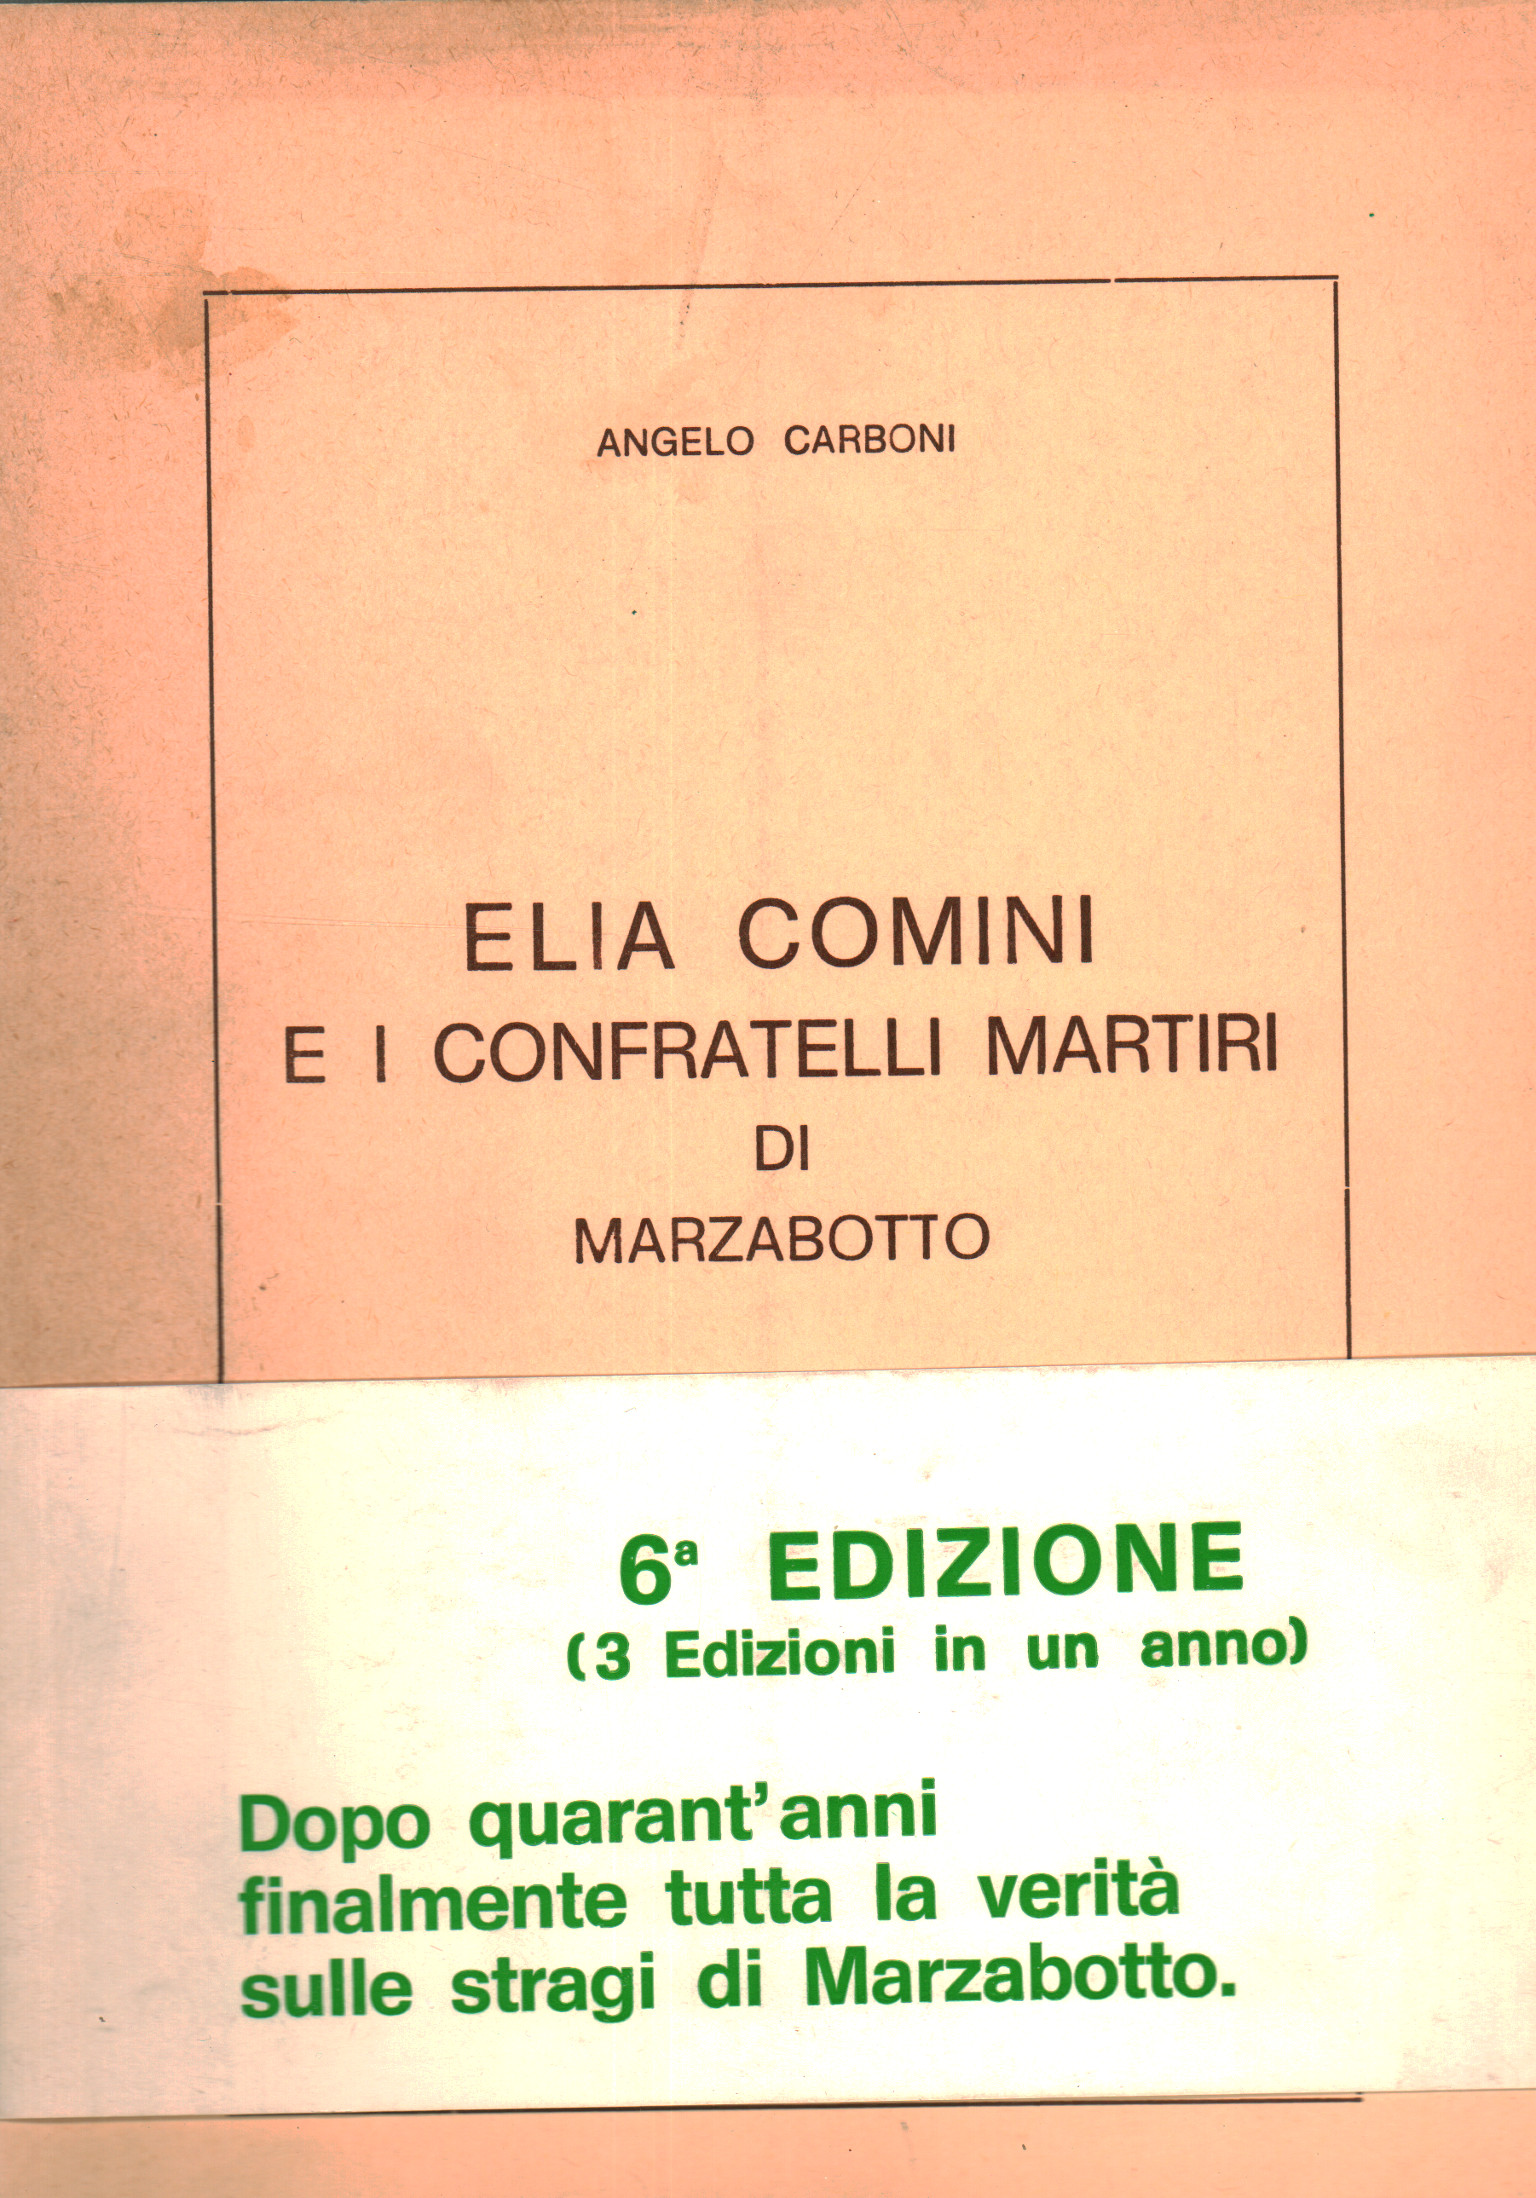 Elia Comini and the martyr brothers of Marzabotto, Angelo Carboni